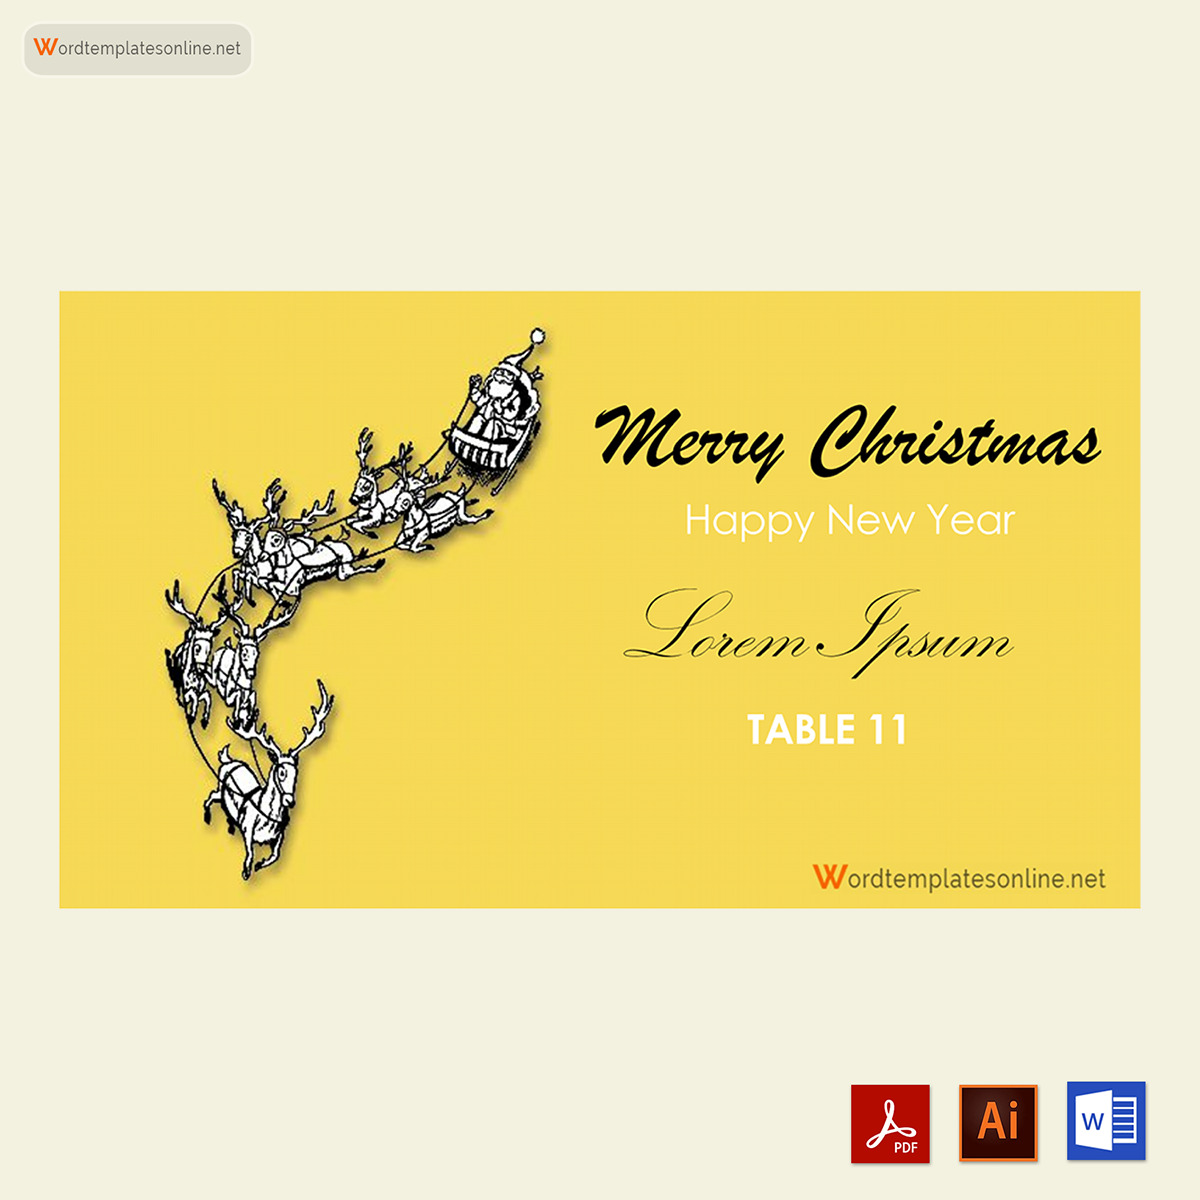 Free Editable Place Card Template - Download Now